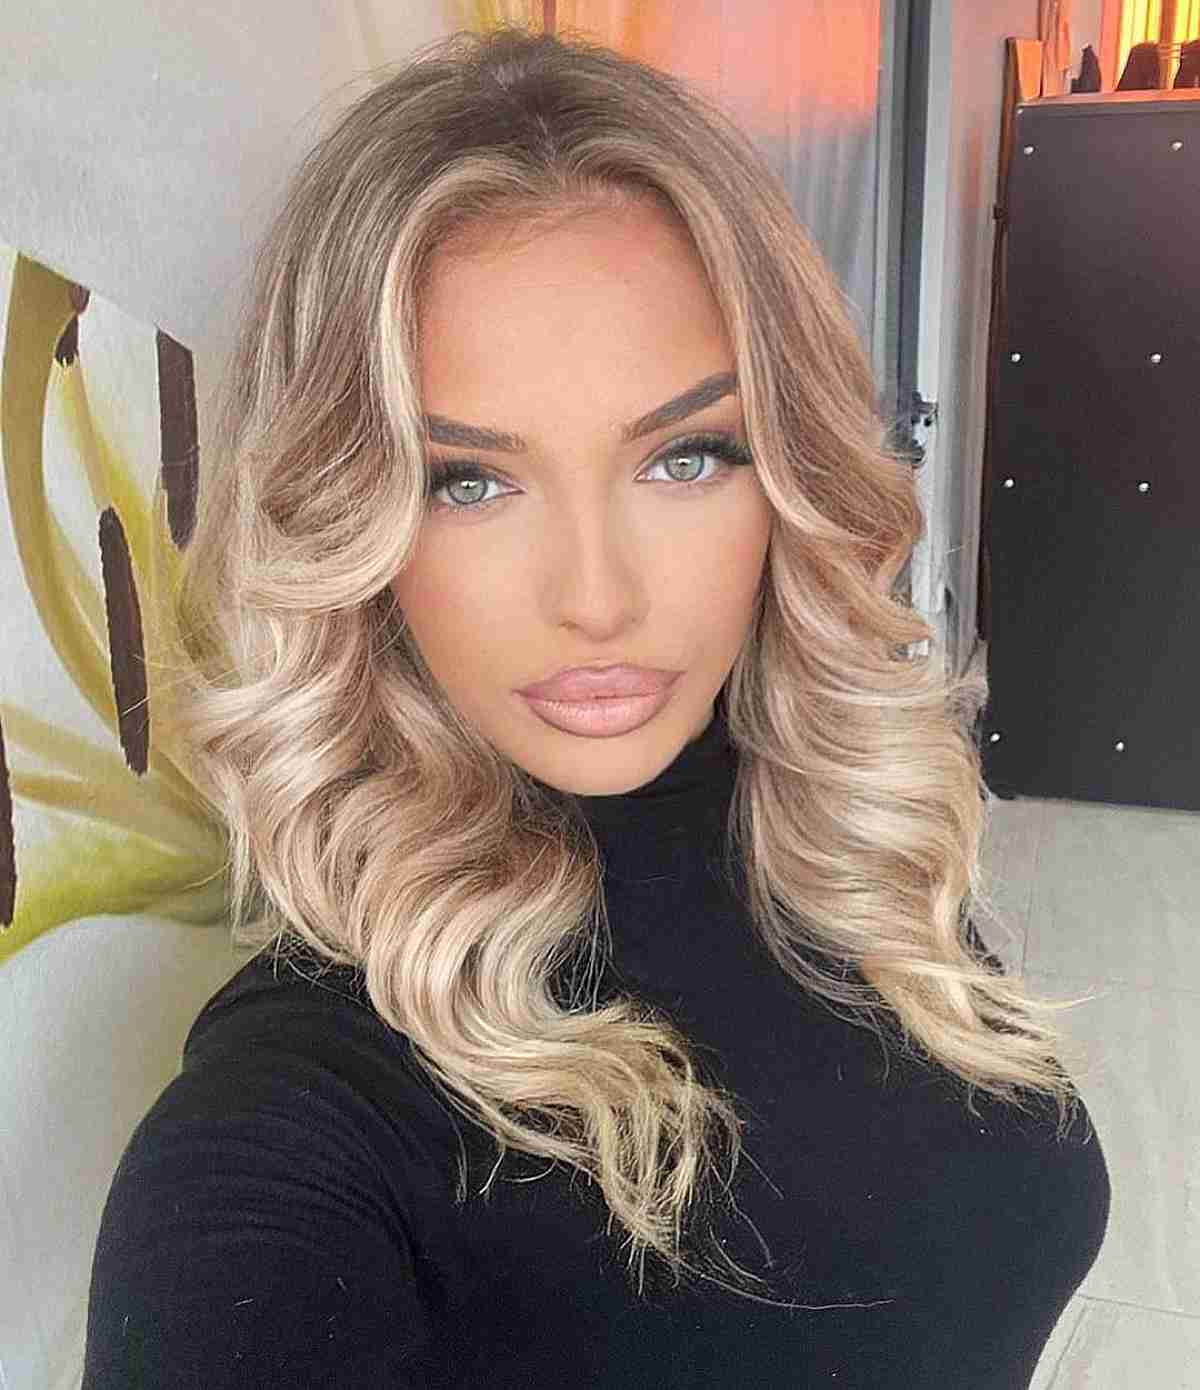 Stunning Mid-Length Blonde Layered Hair with Curled Ends